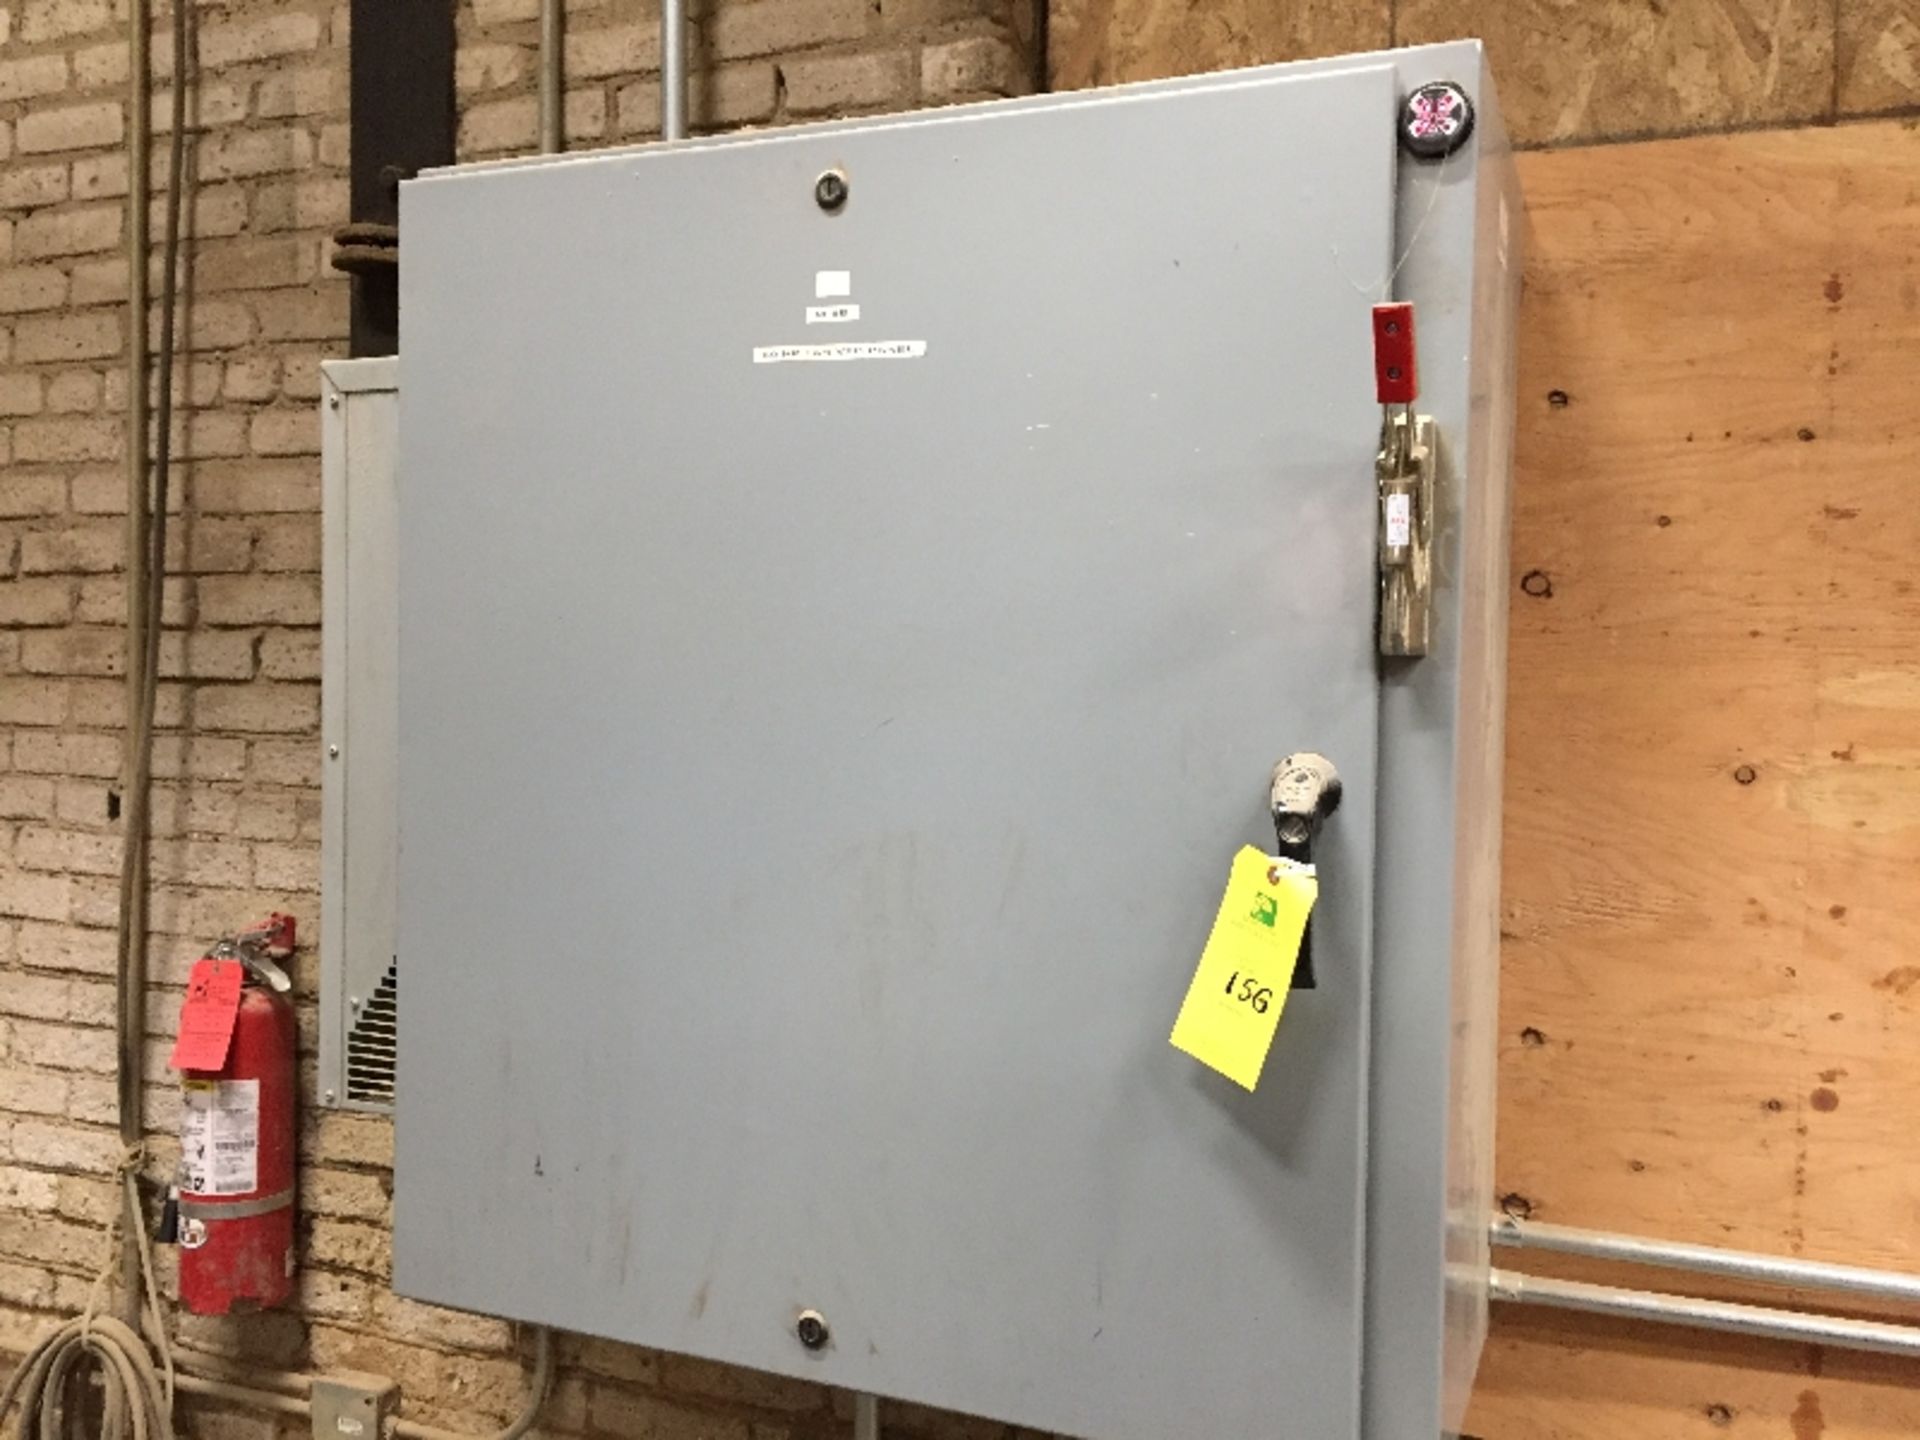 60-hp fan VFD Panel. __$TBD__rigging and loading fee to be added to winning bidder's invoice. Rigger